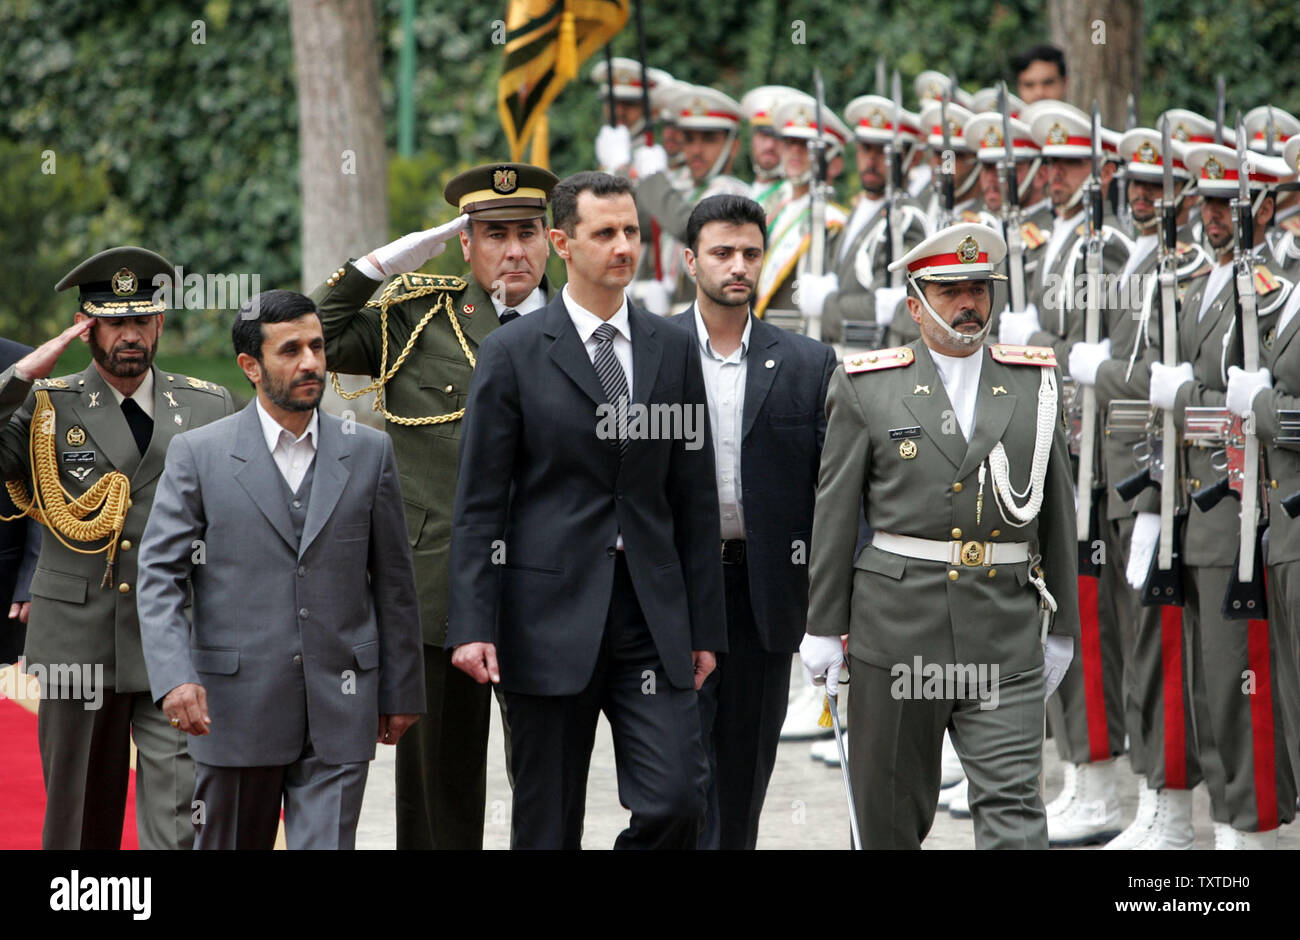 Iranian president Mahmoud Ahmadinejad (L) walks with his Syrian counterpart Bashar Al-Assad (R) during a welcome ceremony at the presidential palace in Tehran on February 17, 2007.  (UPI Photo) Stock Photo